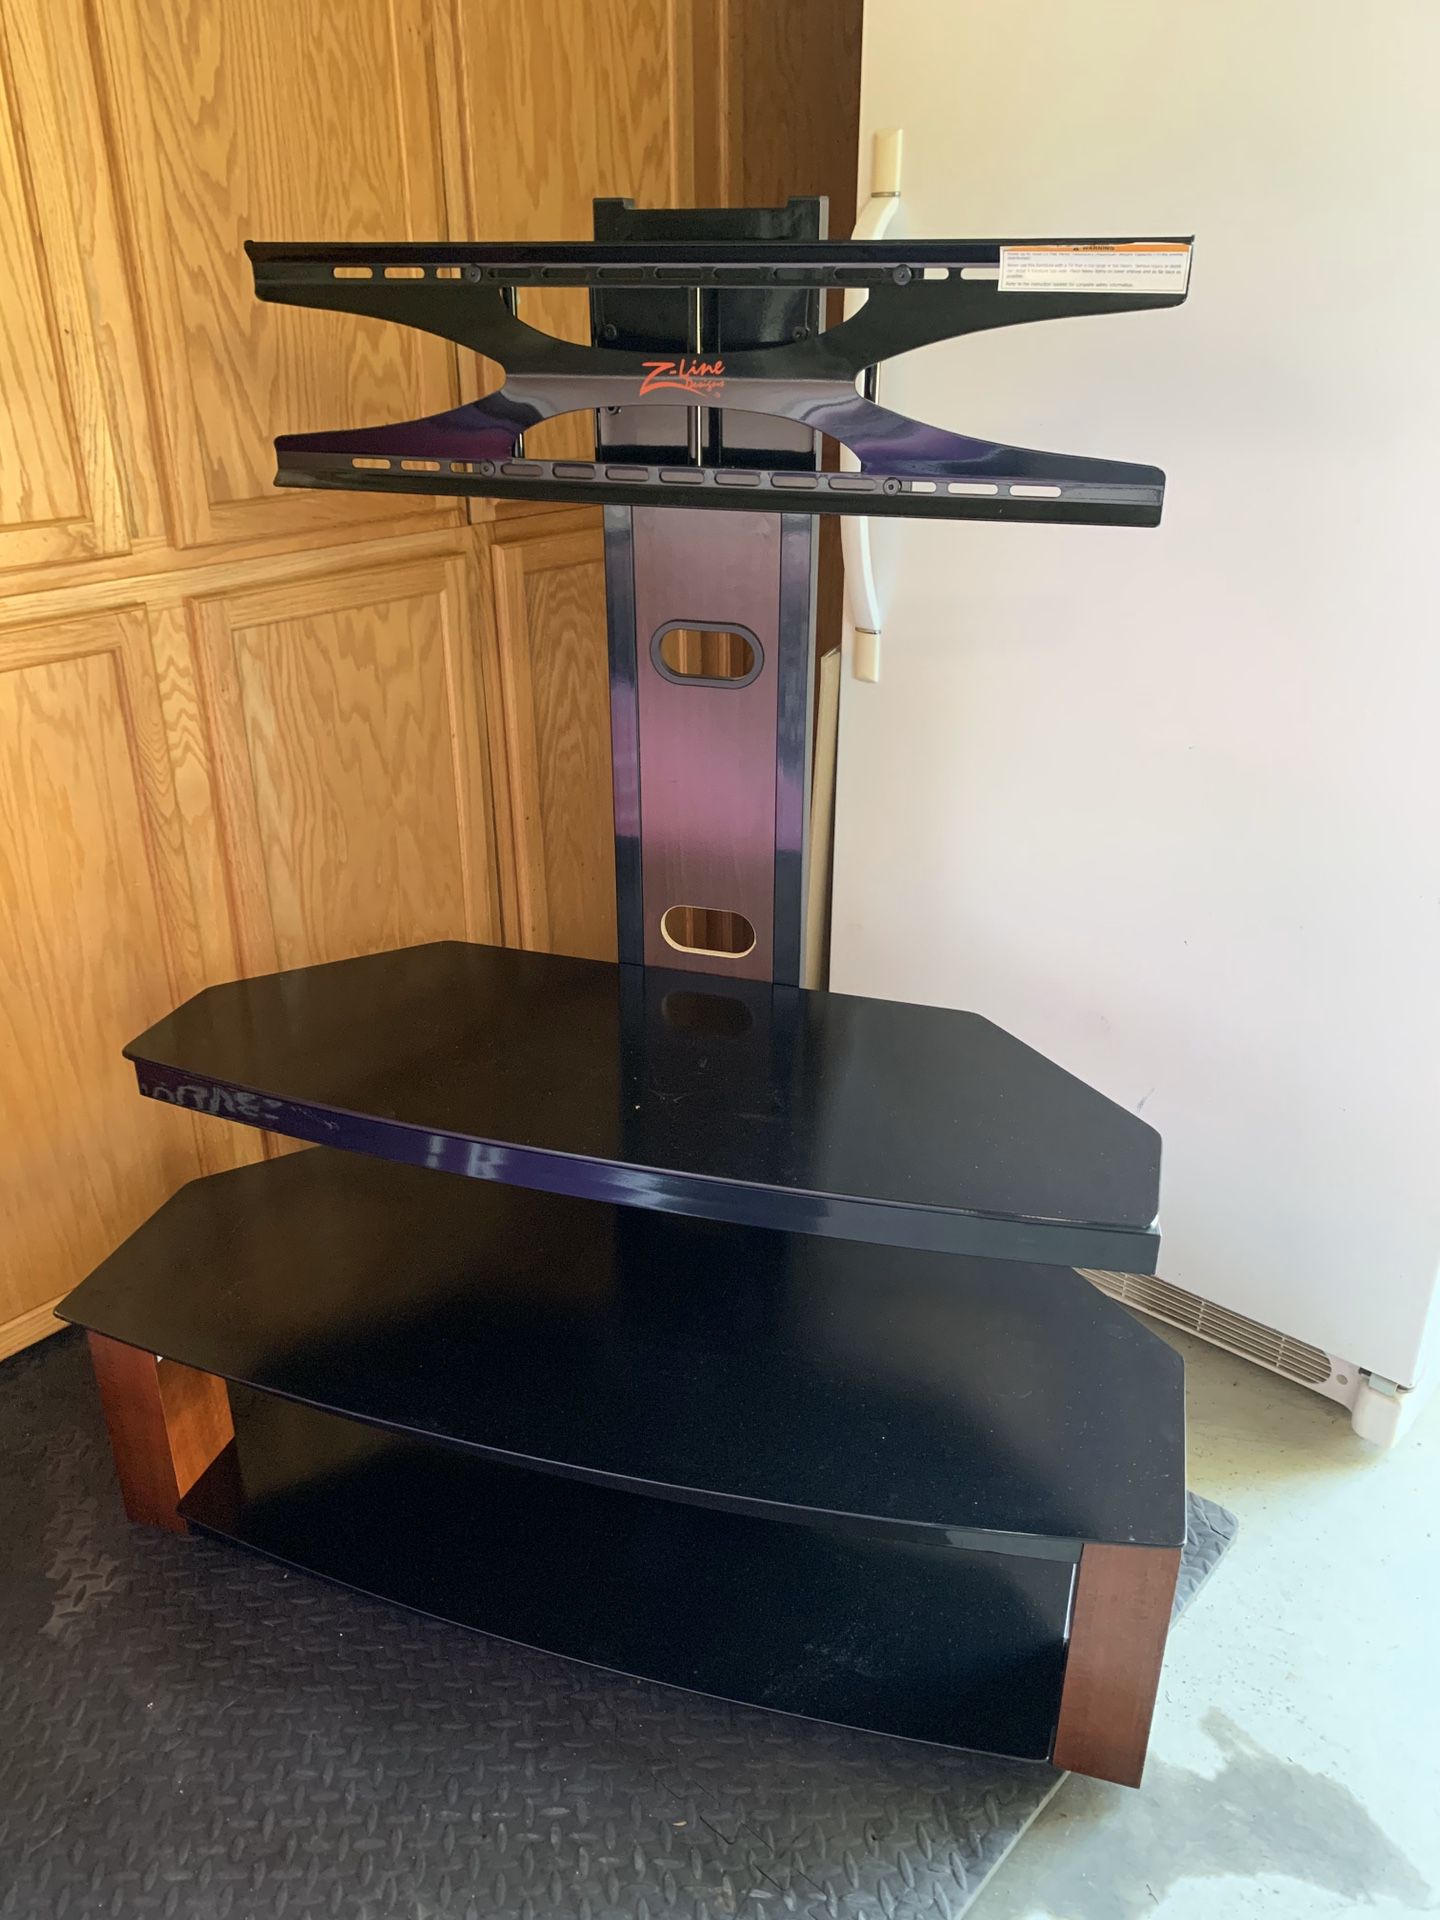 TV Stand in Perfect Condition! Includes Adjustable TV Mount!